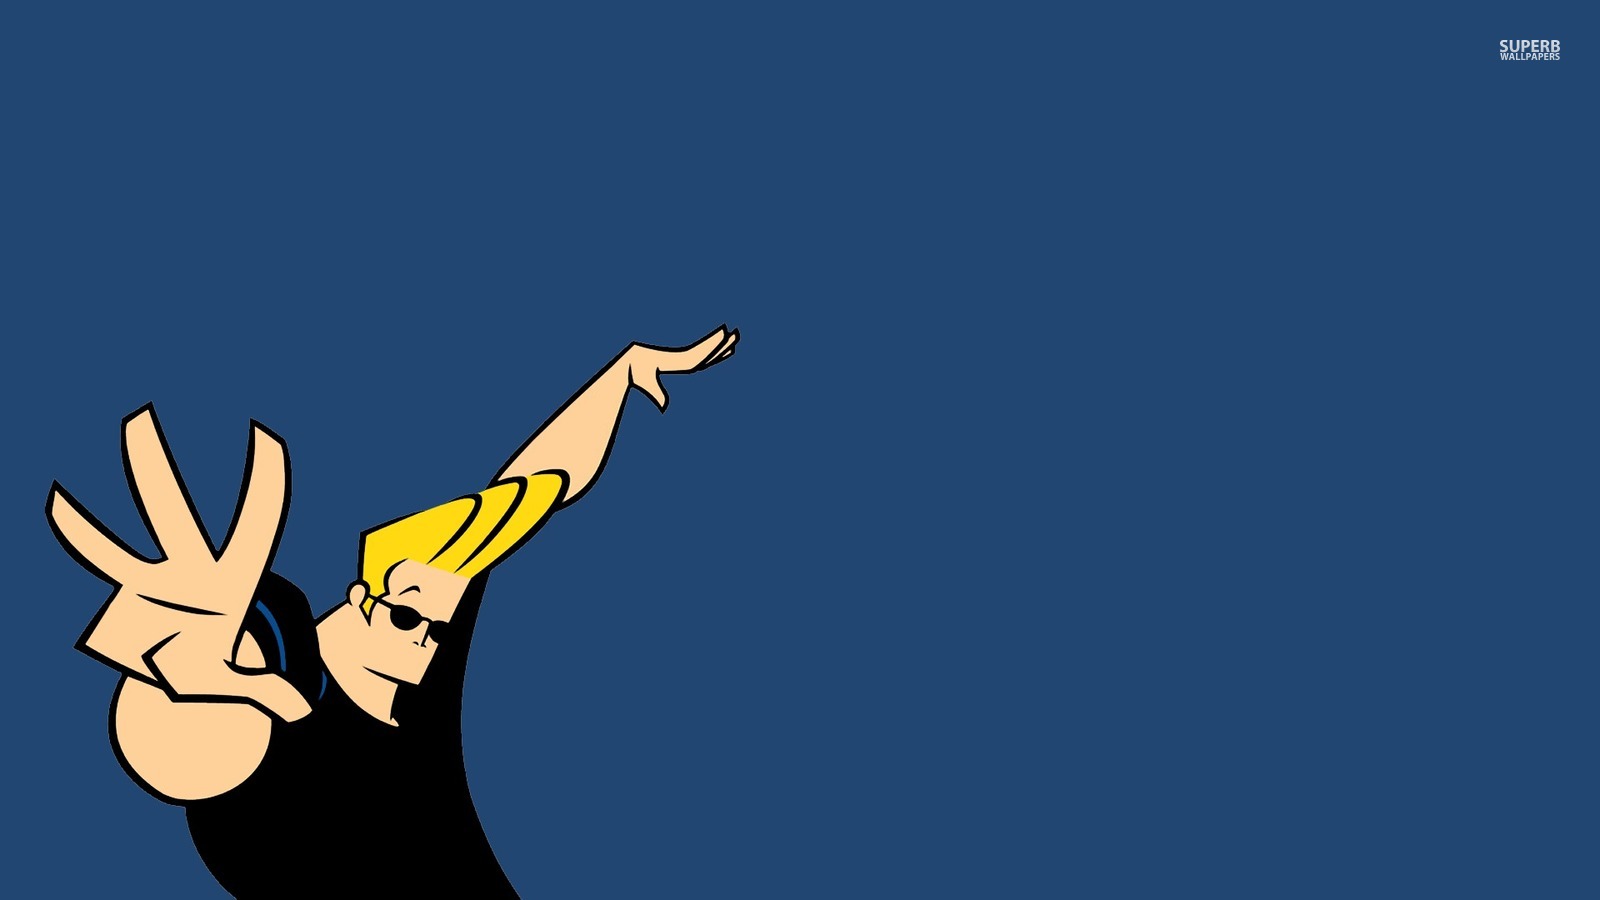 Johnny Bravo Image HD Wallpaper And Background